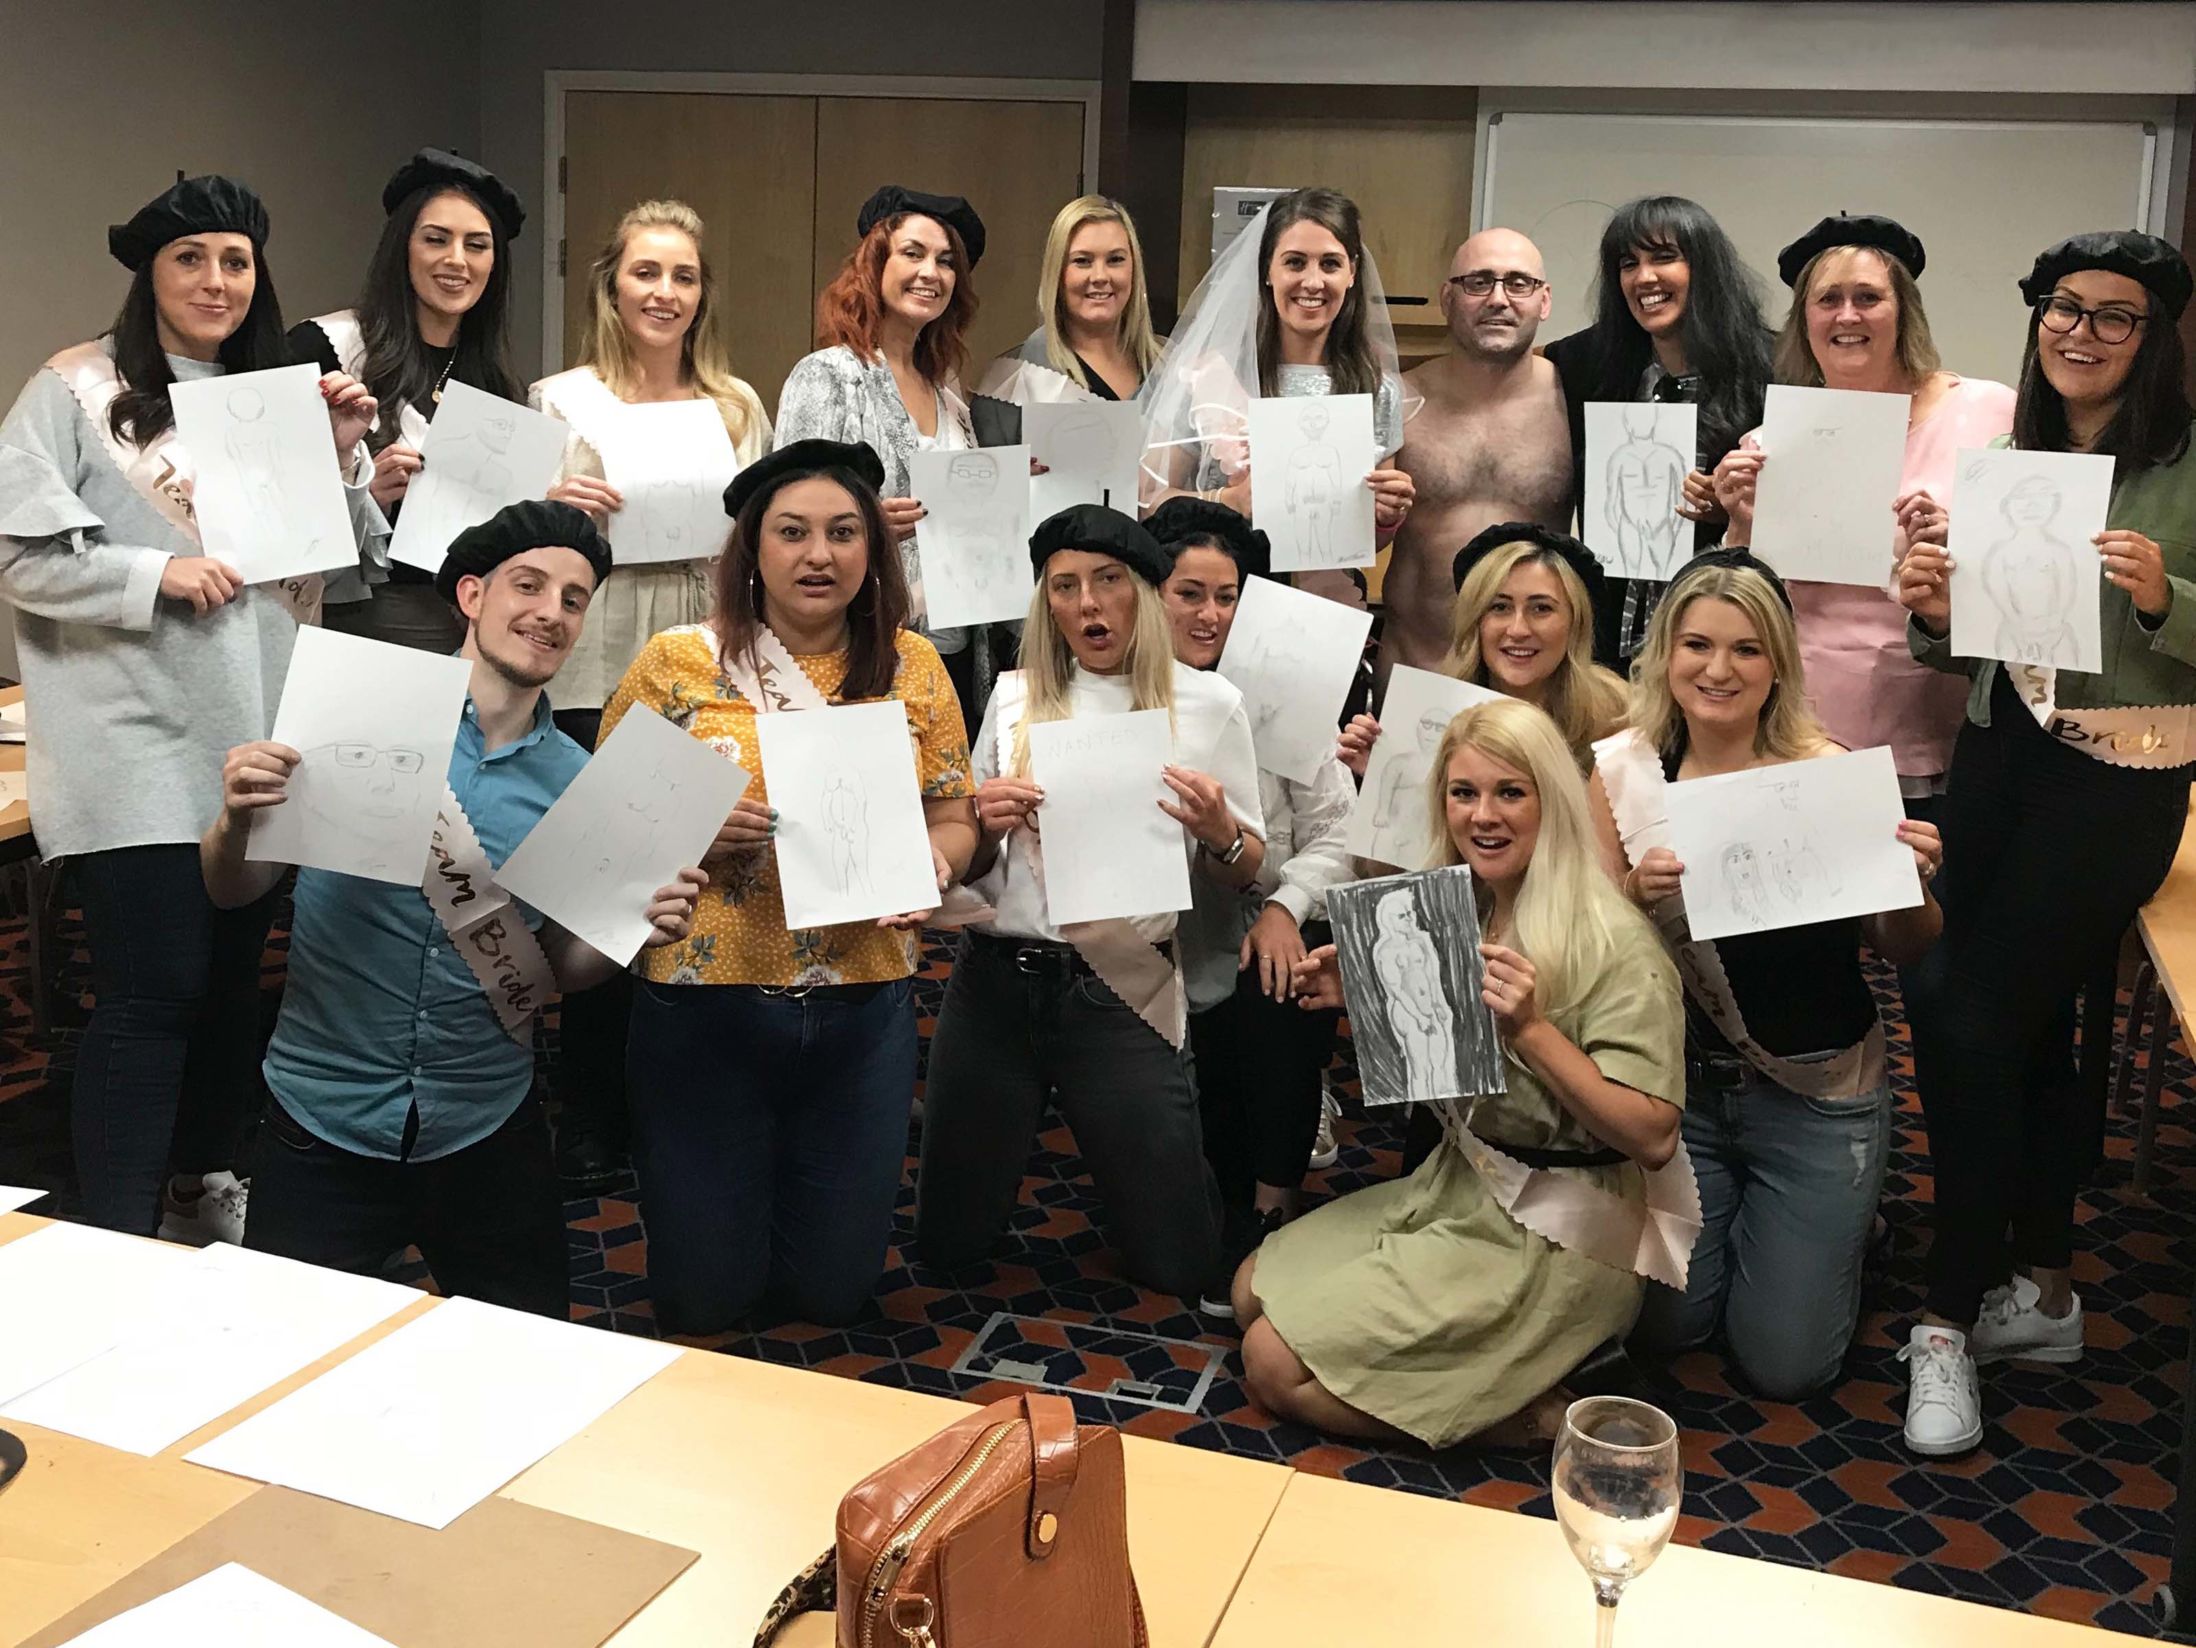 Greatest Hen Party Activities & Ideas in Cardiff - Life Drawing